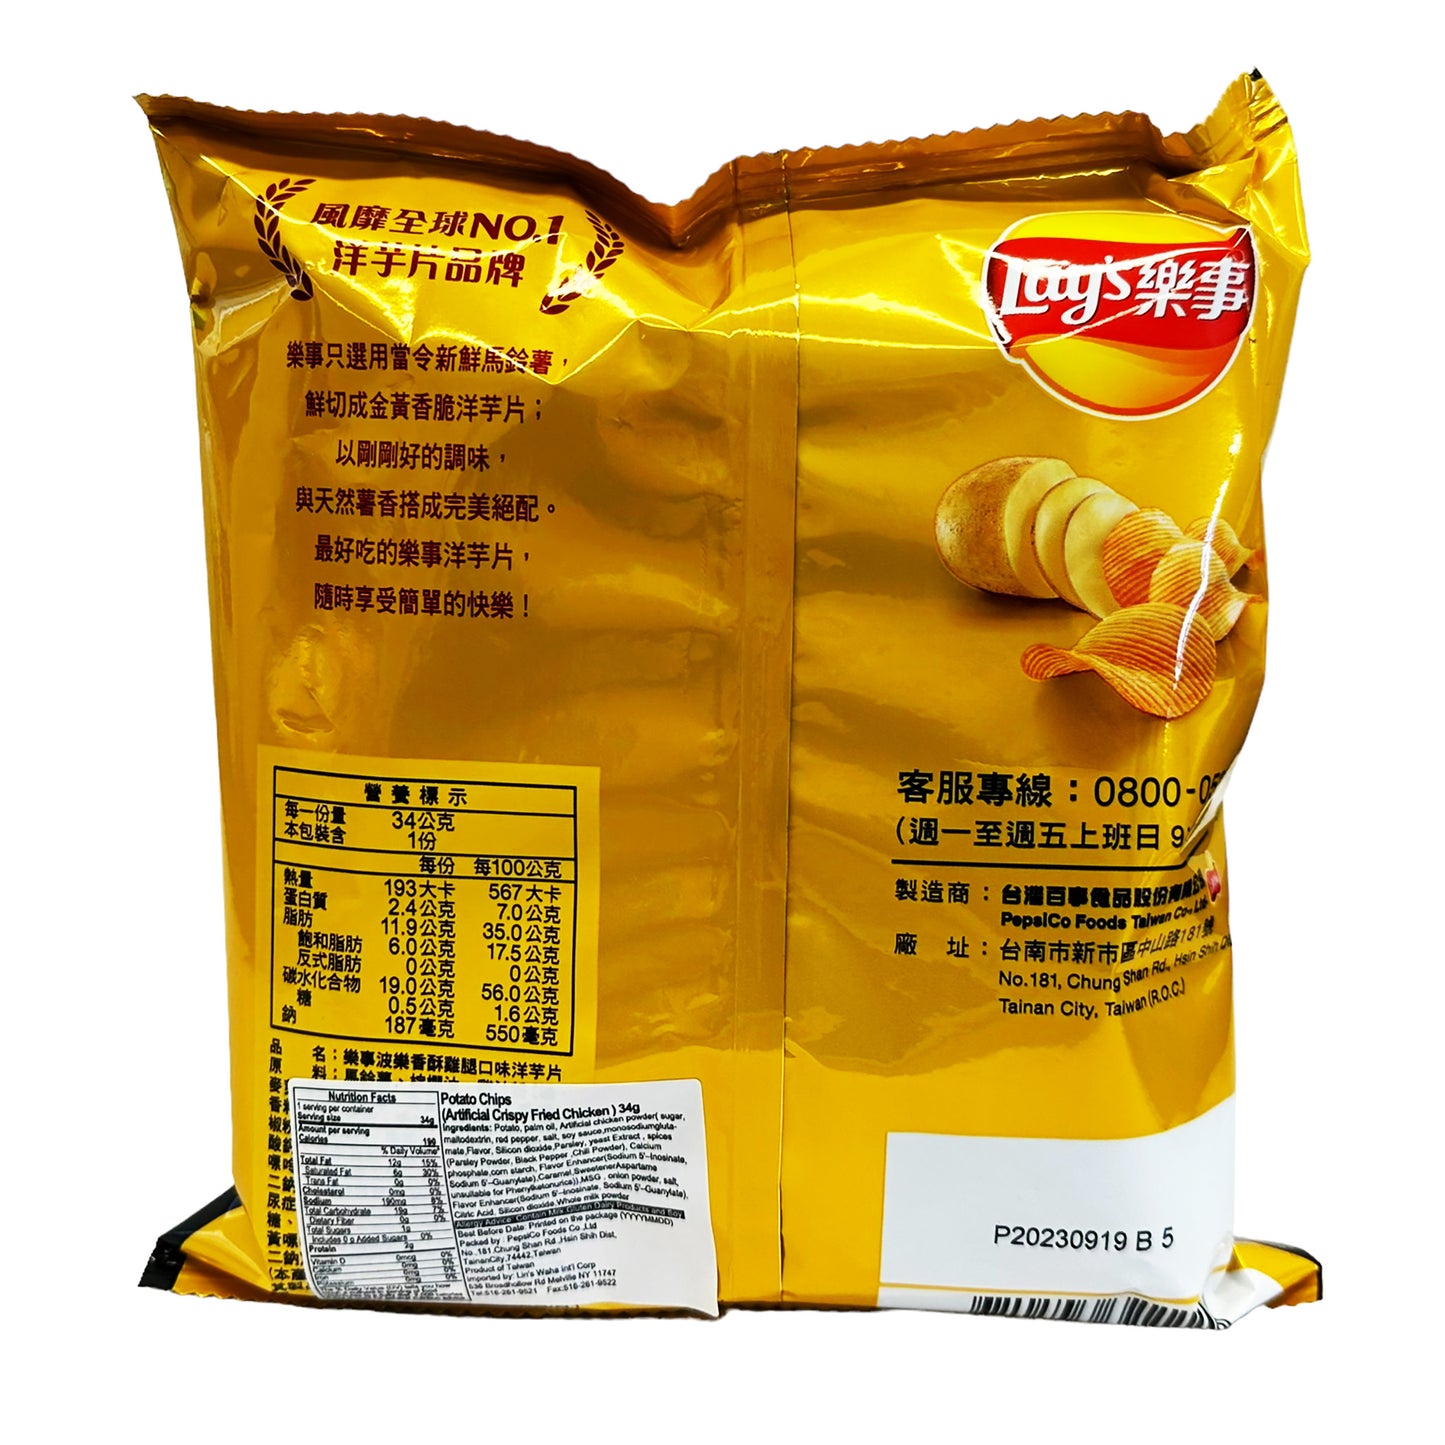 Back graphic image of Lay's Potato Chips - Crispy Fried Chicken Flavor 1.19oz (34g)